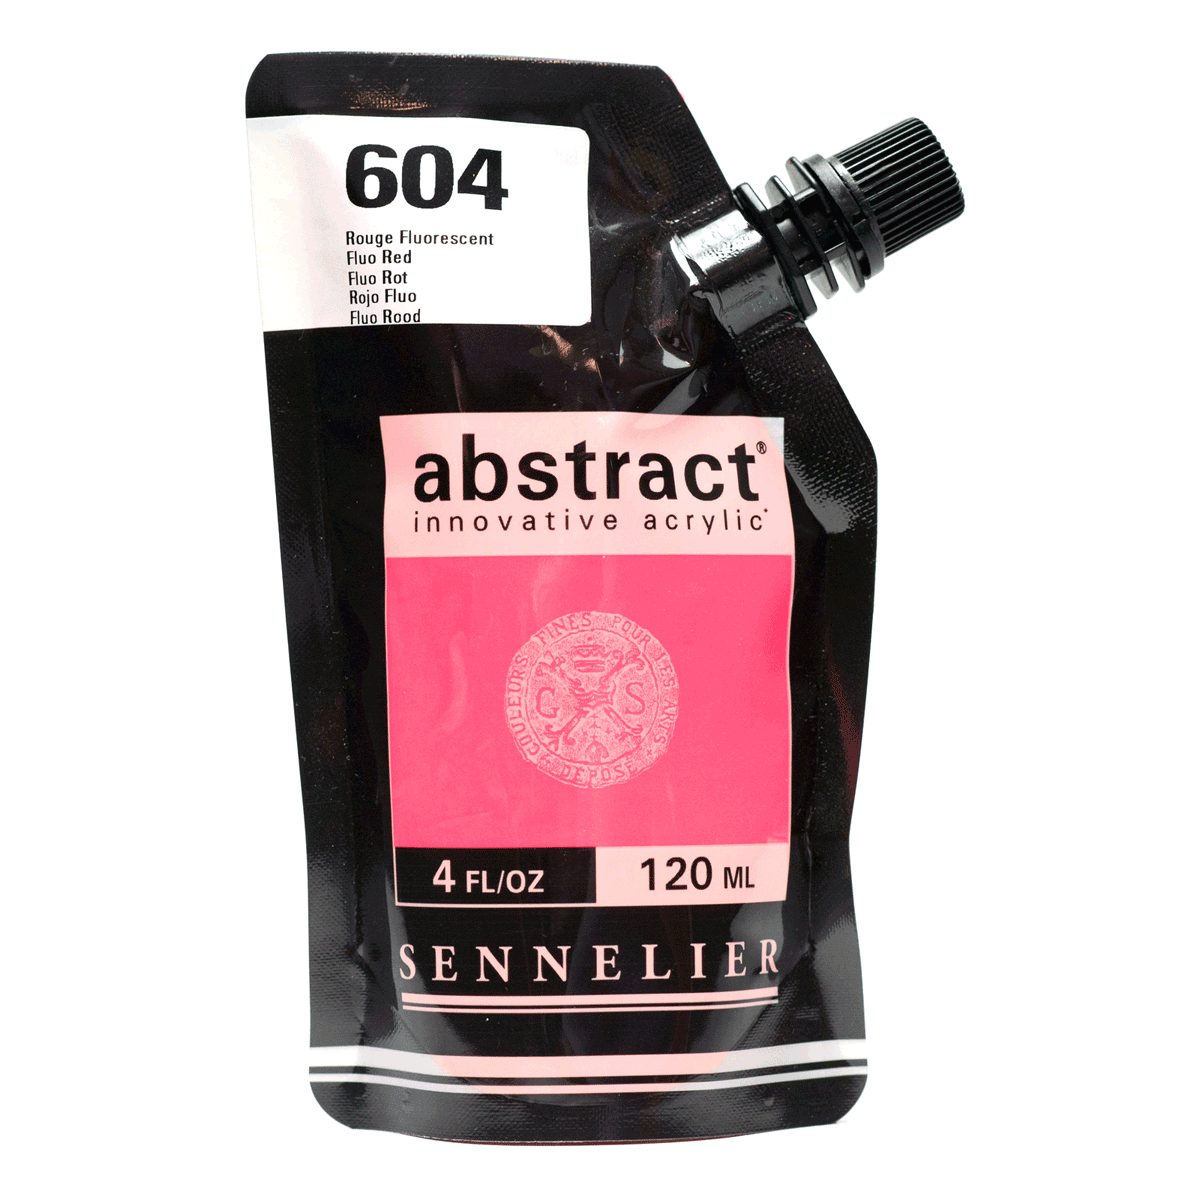 Abstract Acrylic Pouch - 604 Fluorescent Red 120ml